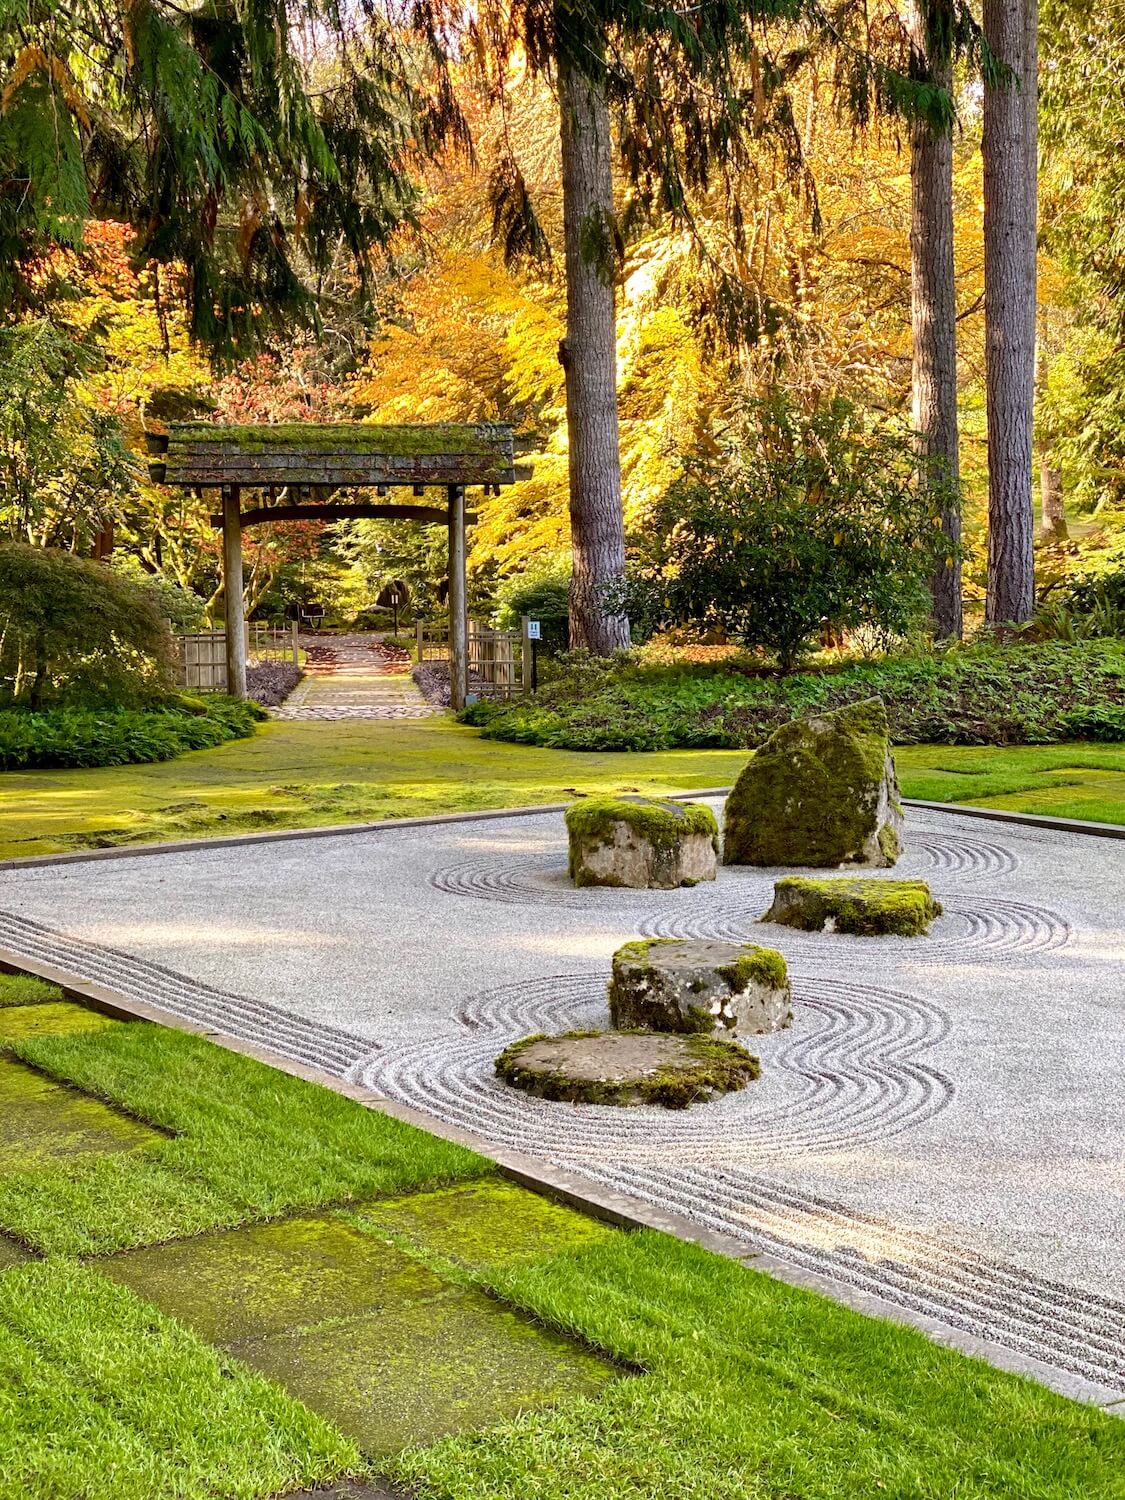 The garden outside the Japanese Guest House on the property of the Bloedel Reserve offers a peaceful escape in the zen of the raked gravel garden, surrounded by green squares of grass and alternating concrete.